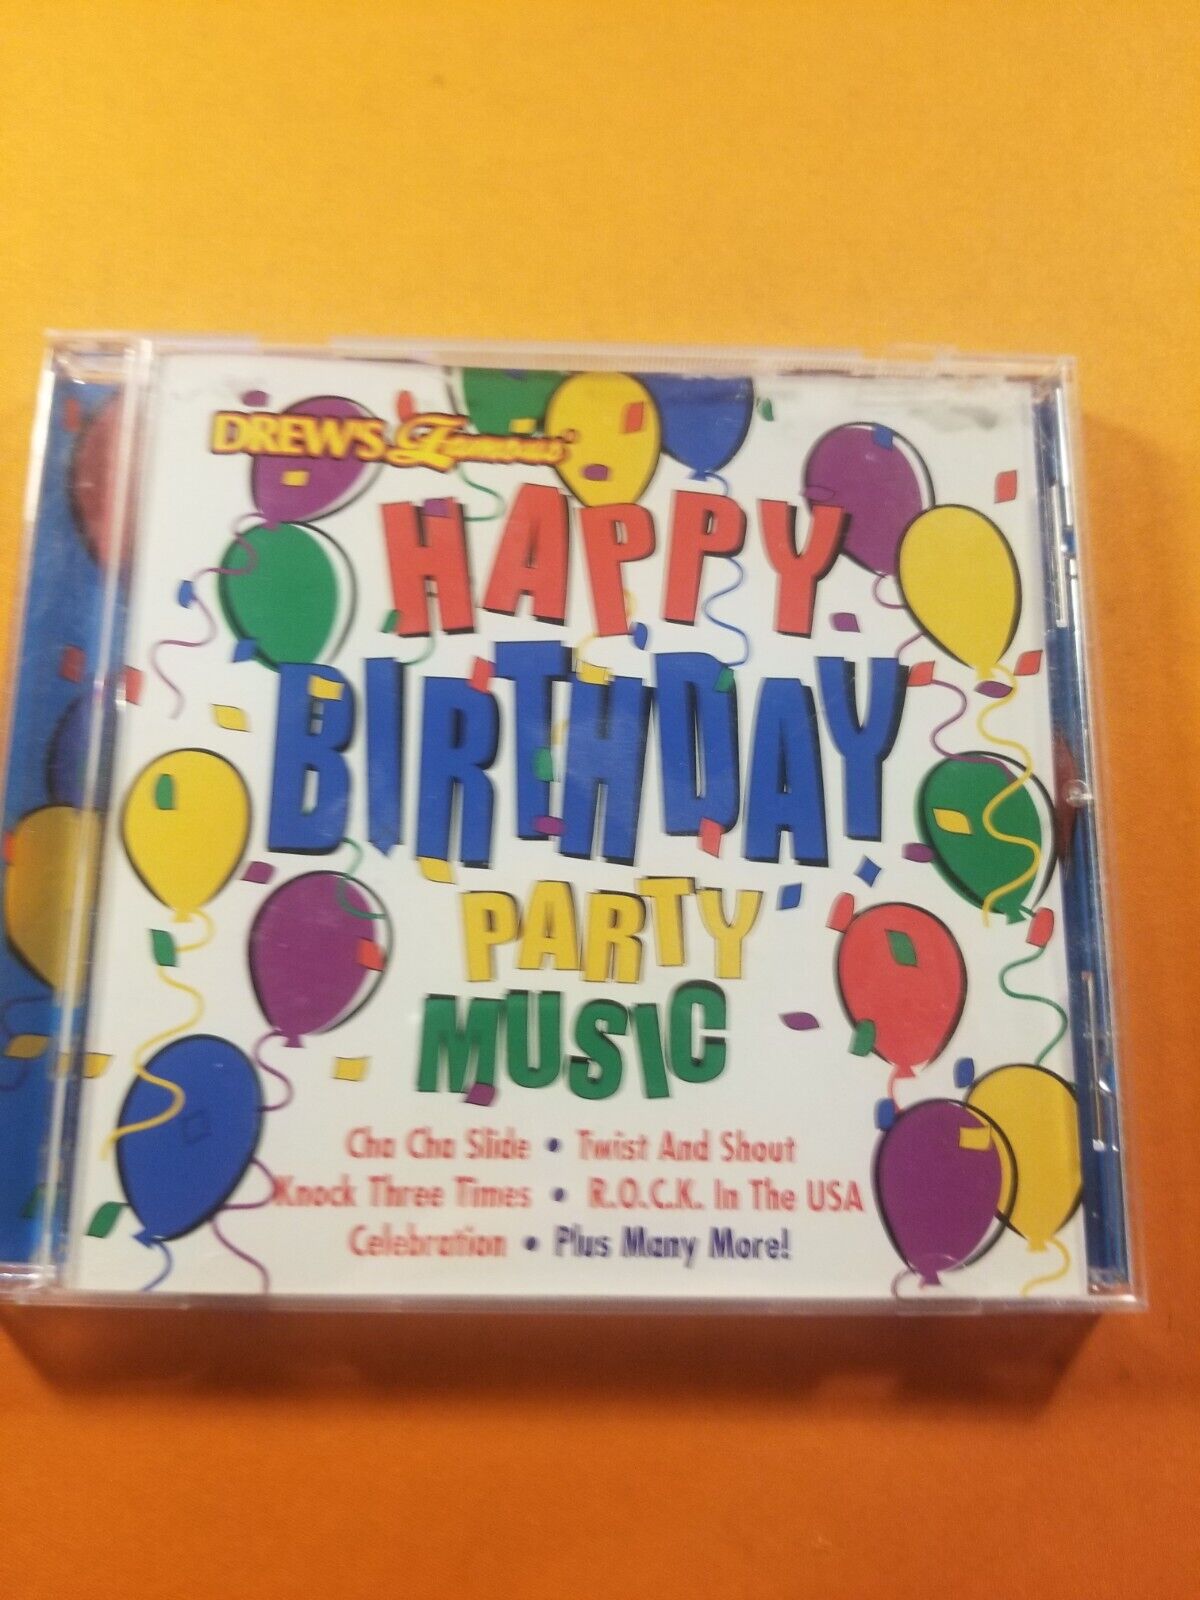 Drew\'s Famous Happy Birthday Party Music by Drew\'s Famous (CD, Apr-2006, Turn Up